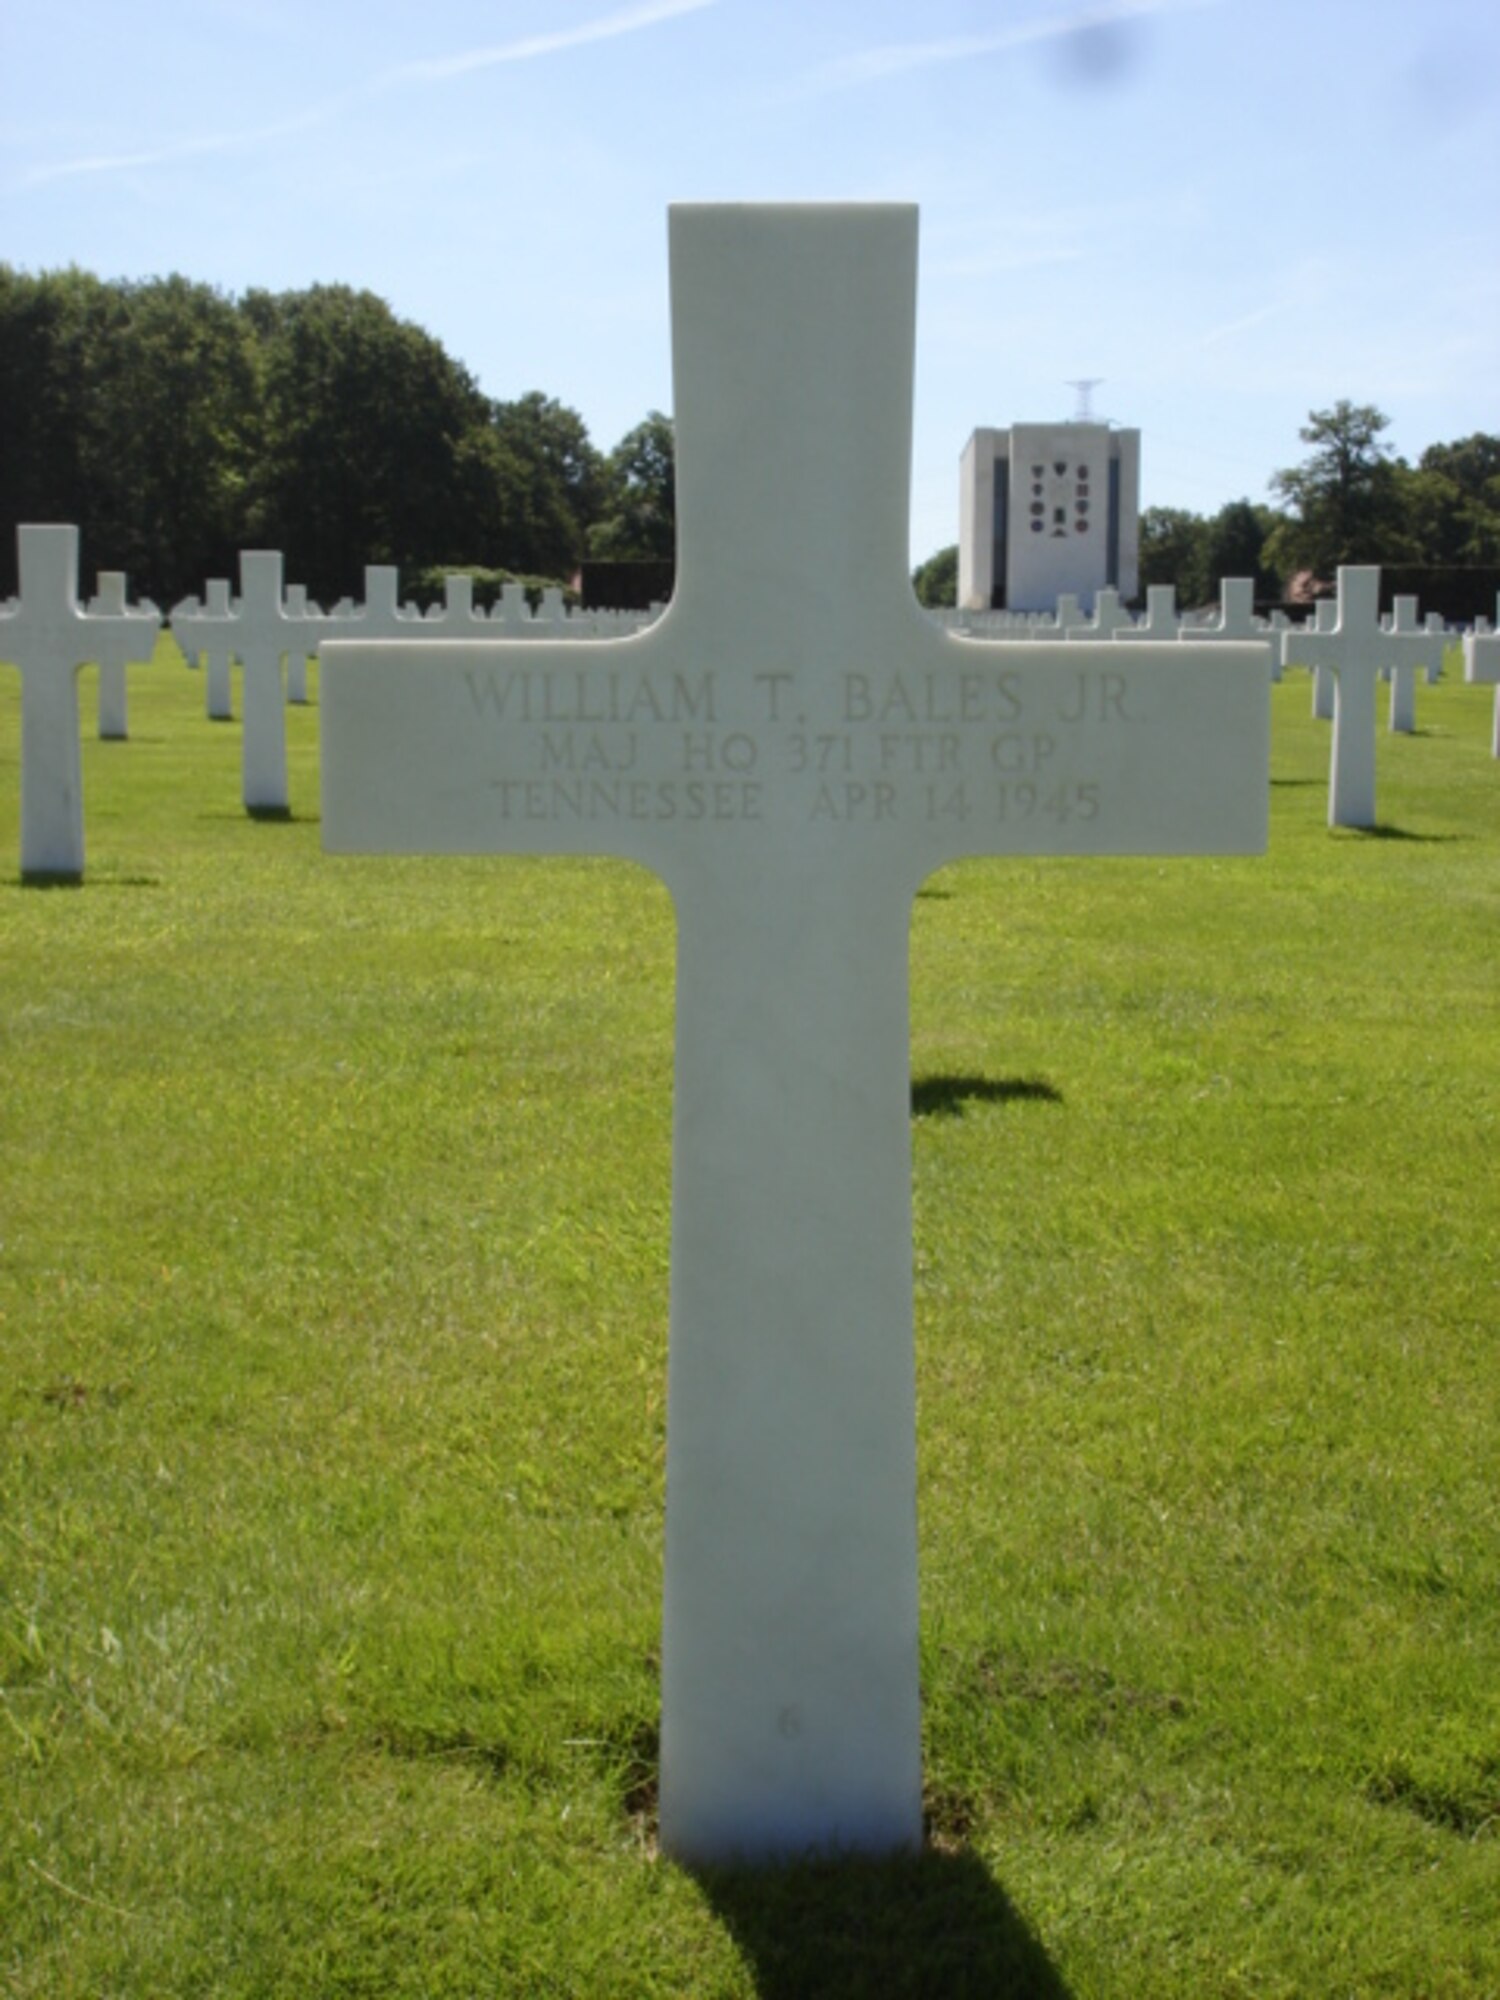 Maj. William T. Bales, Jr., of the Headquarters staff, 371st Fighter Group, is buried in the Ardennes American Cemetery and Memorial, Neuville-en-Condroz, Arrondissement de Liège, Liège, Belgium in Plot D, Row 8, Grave 6. (Find a Grave.com)